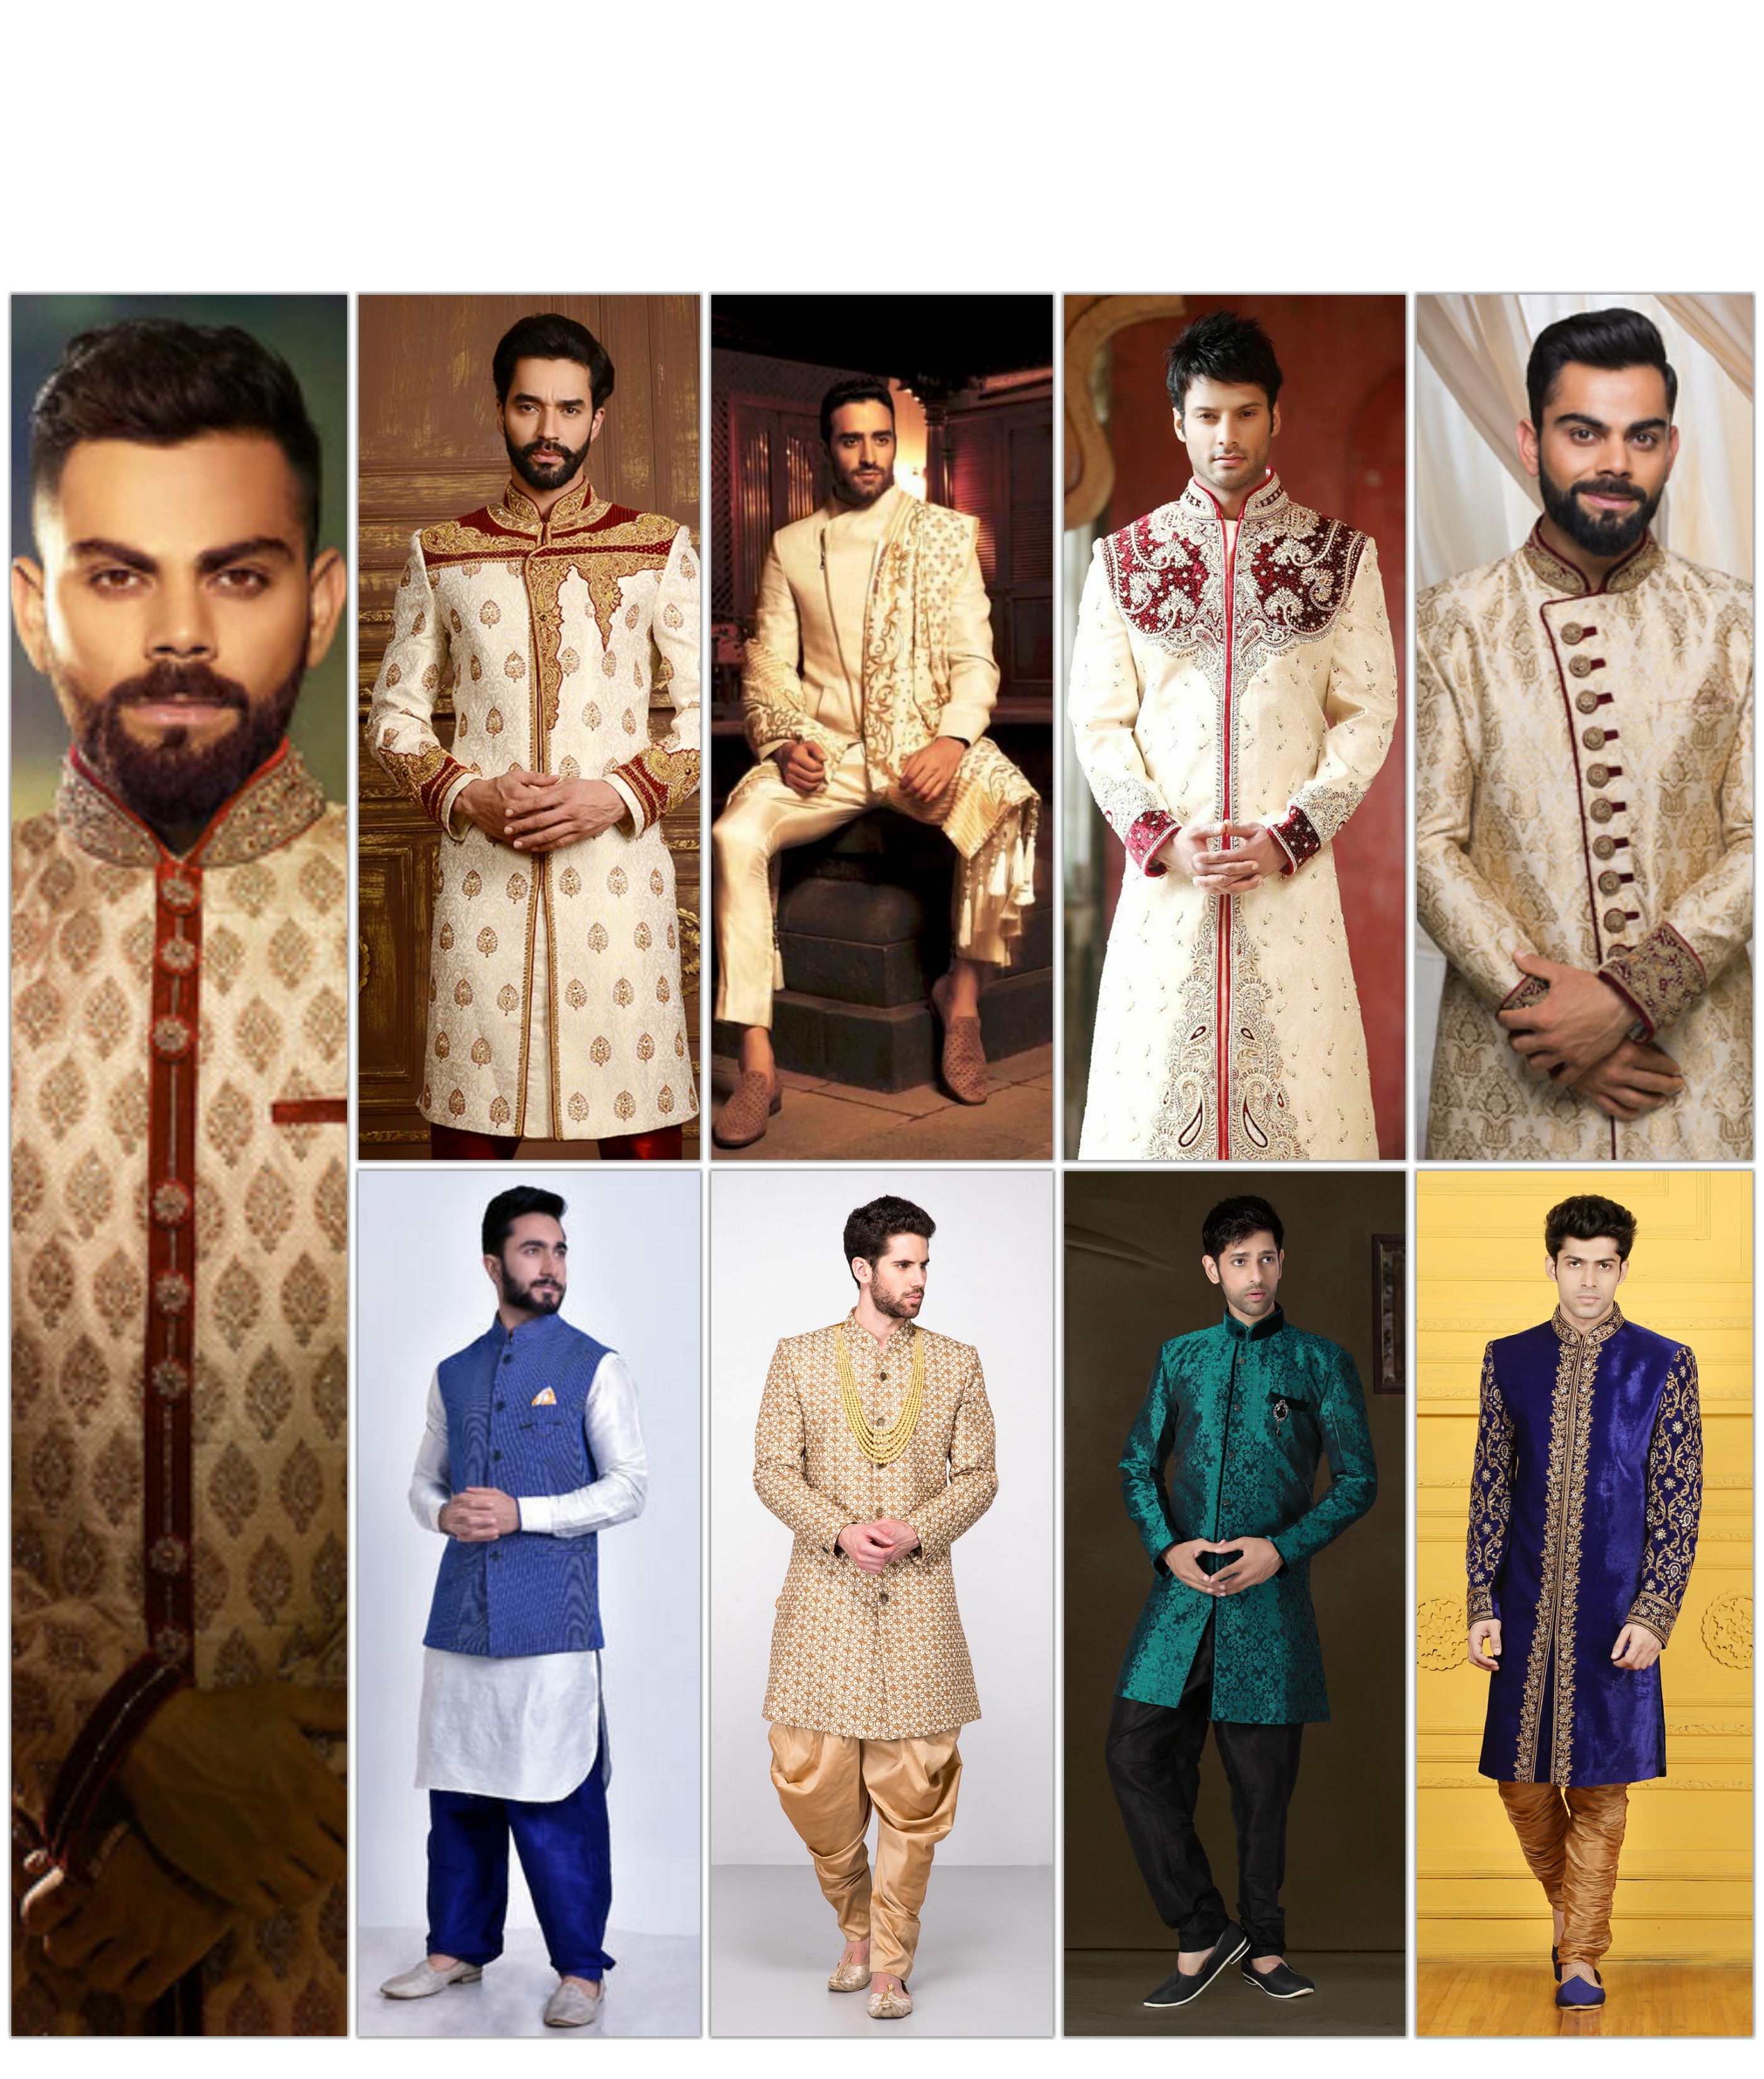 Top 10 Sherwanis for Men – A Guide to Make You Look the Best on Your Wedding Day